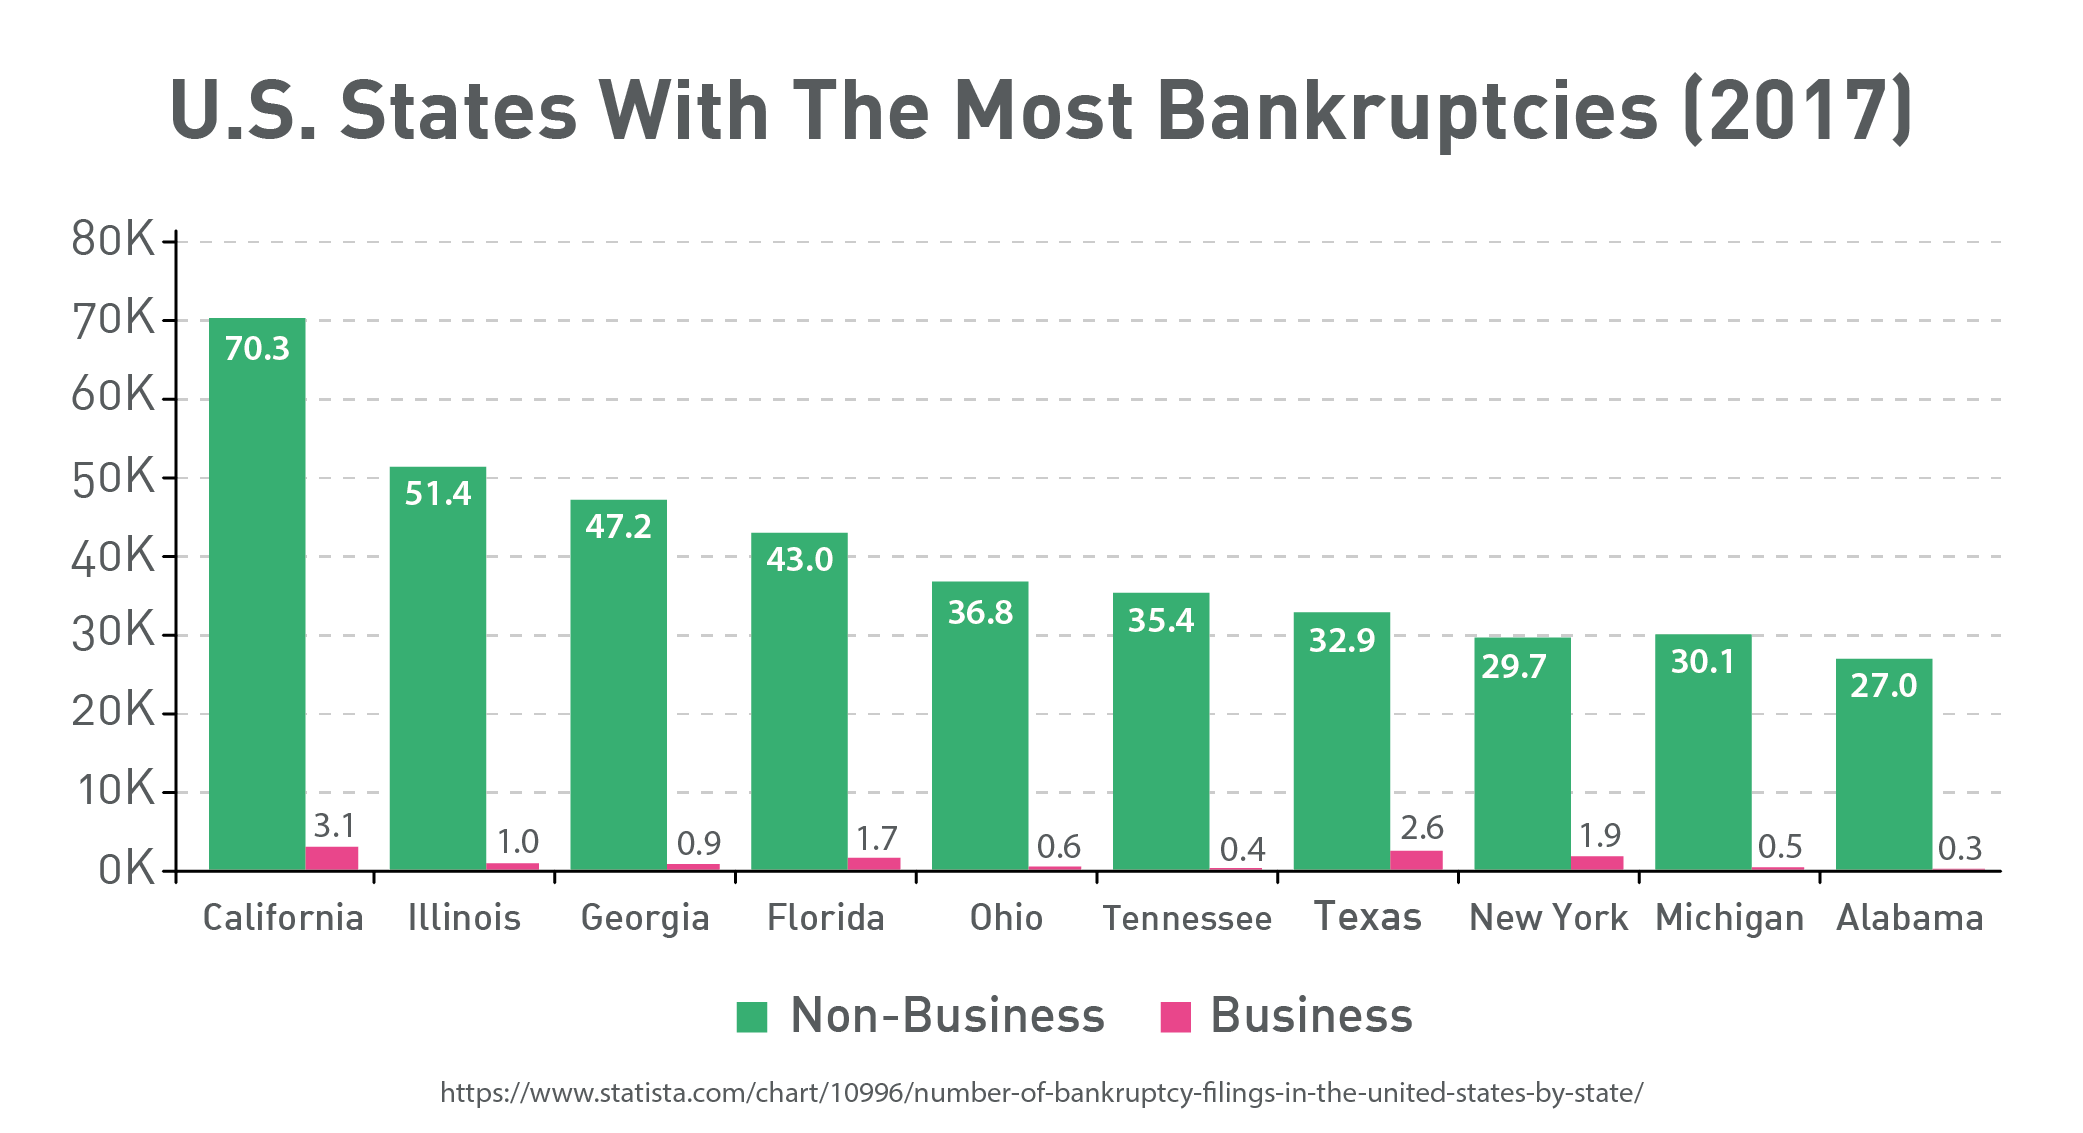 U.S. States With The Most Bankruptcies (2017)